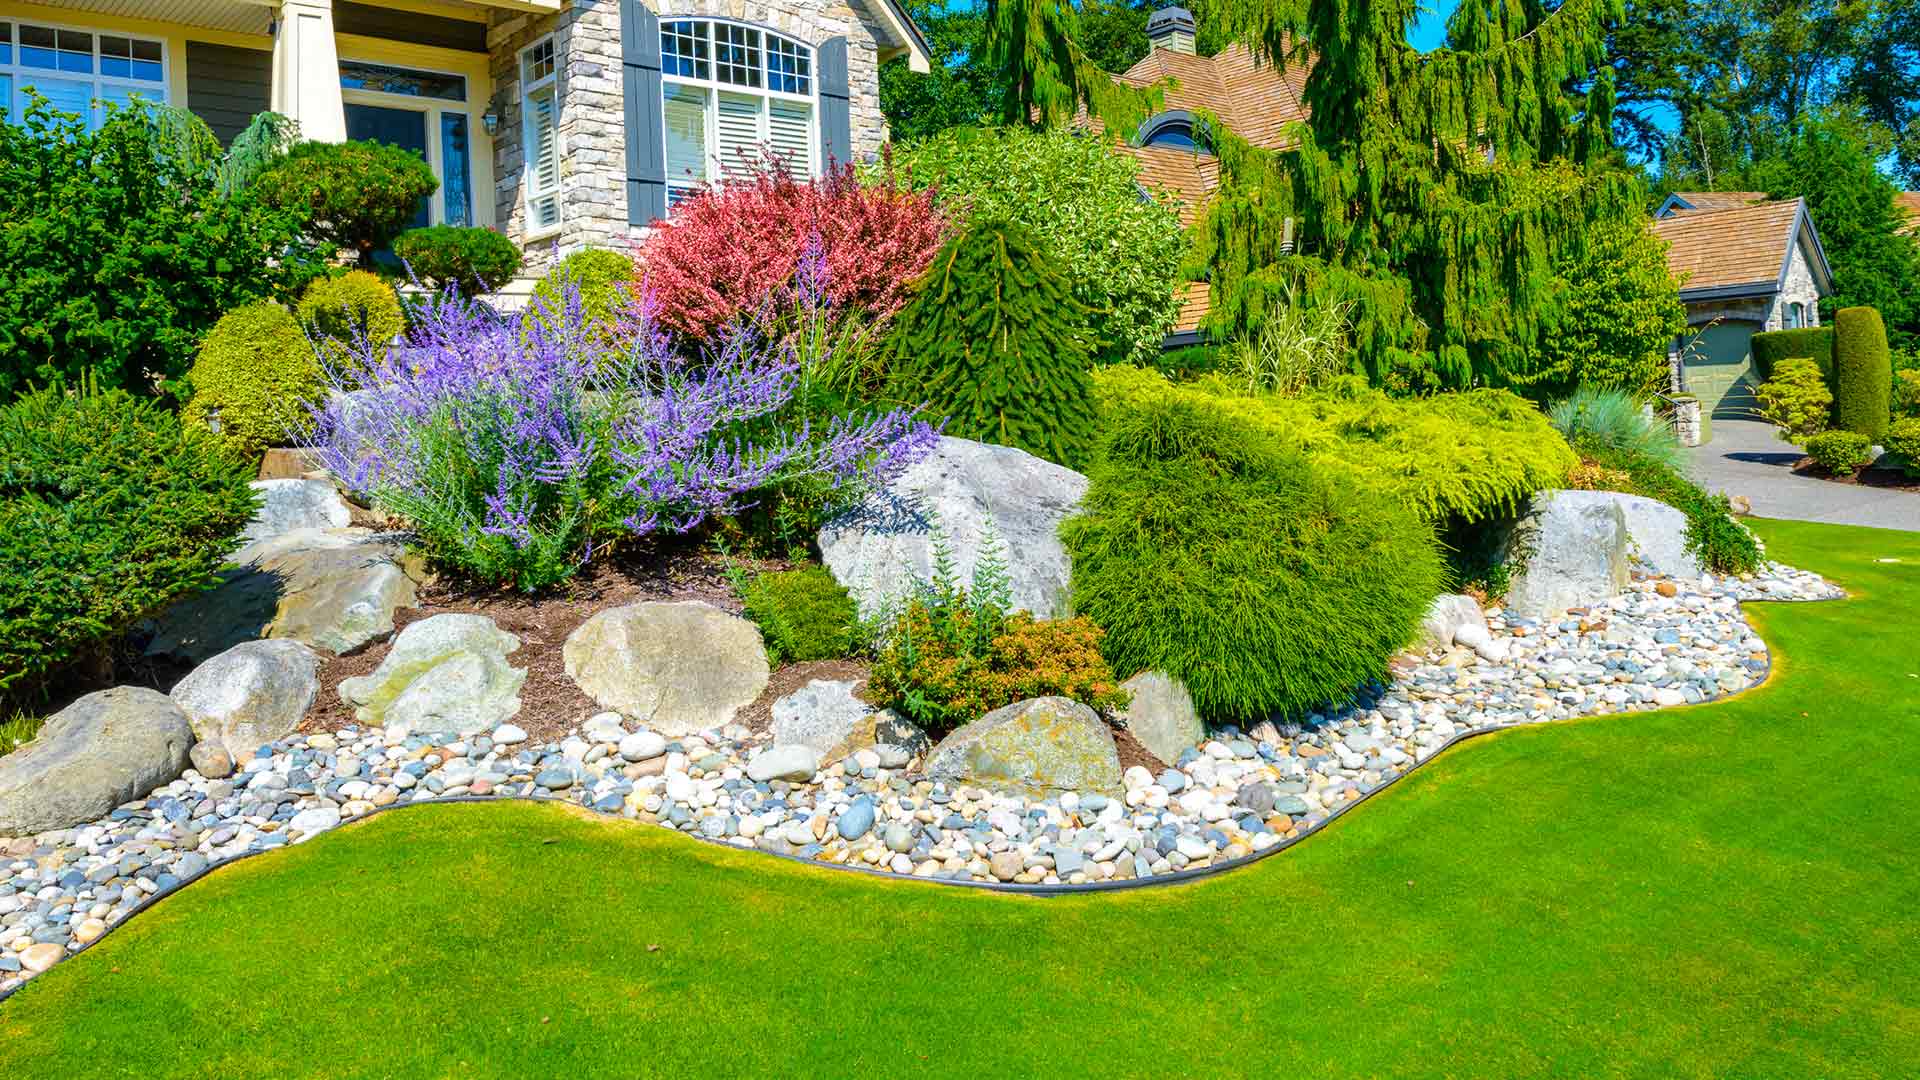 A Glen Carbon, IL home with landscaping services.